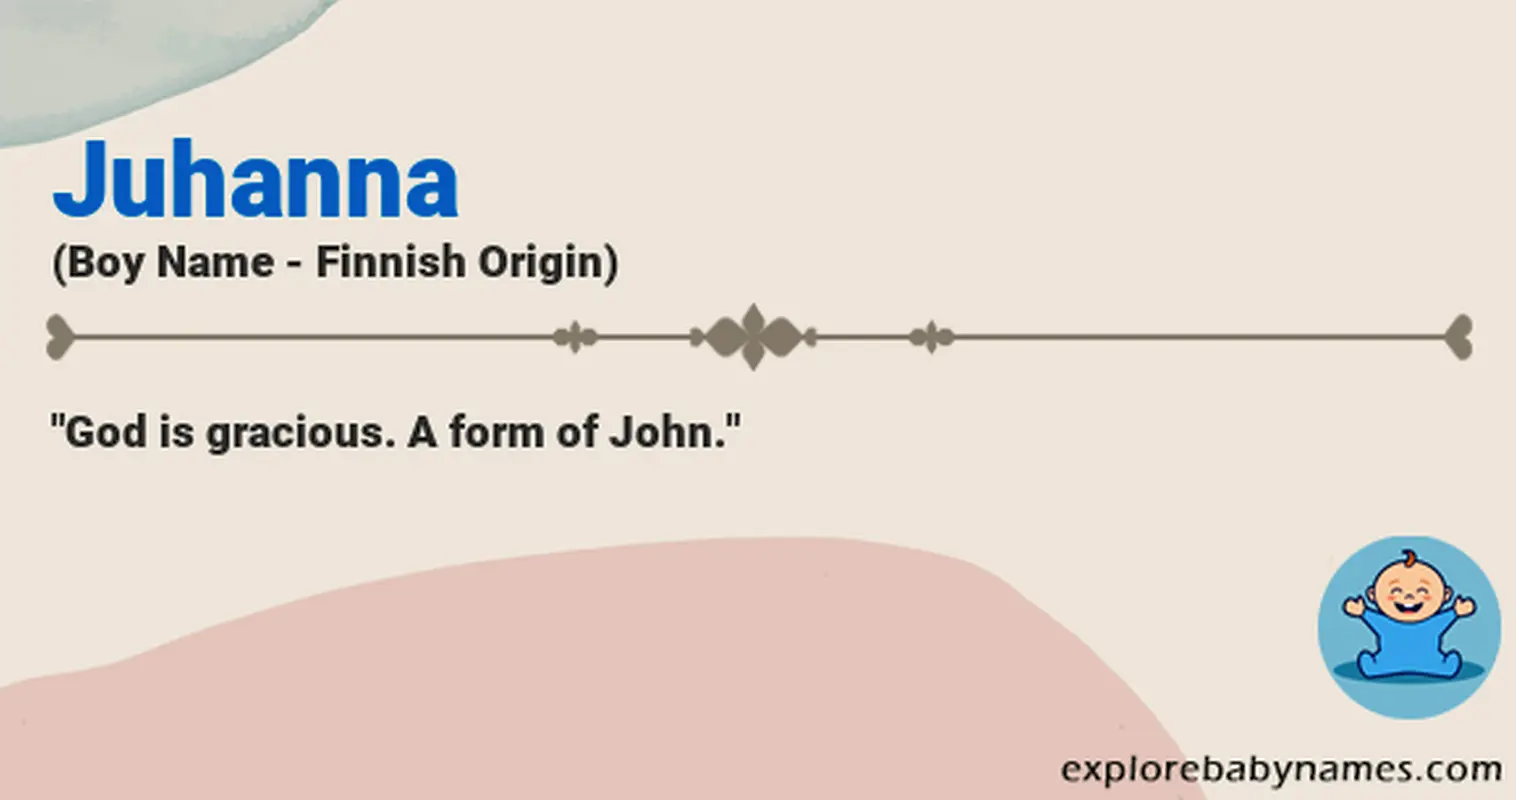 Meaning of Juhanna